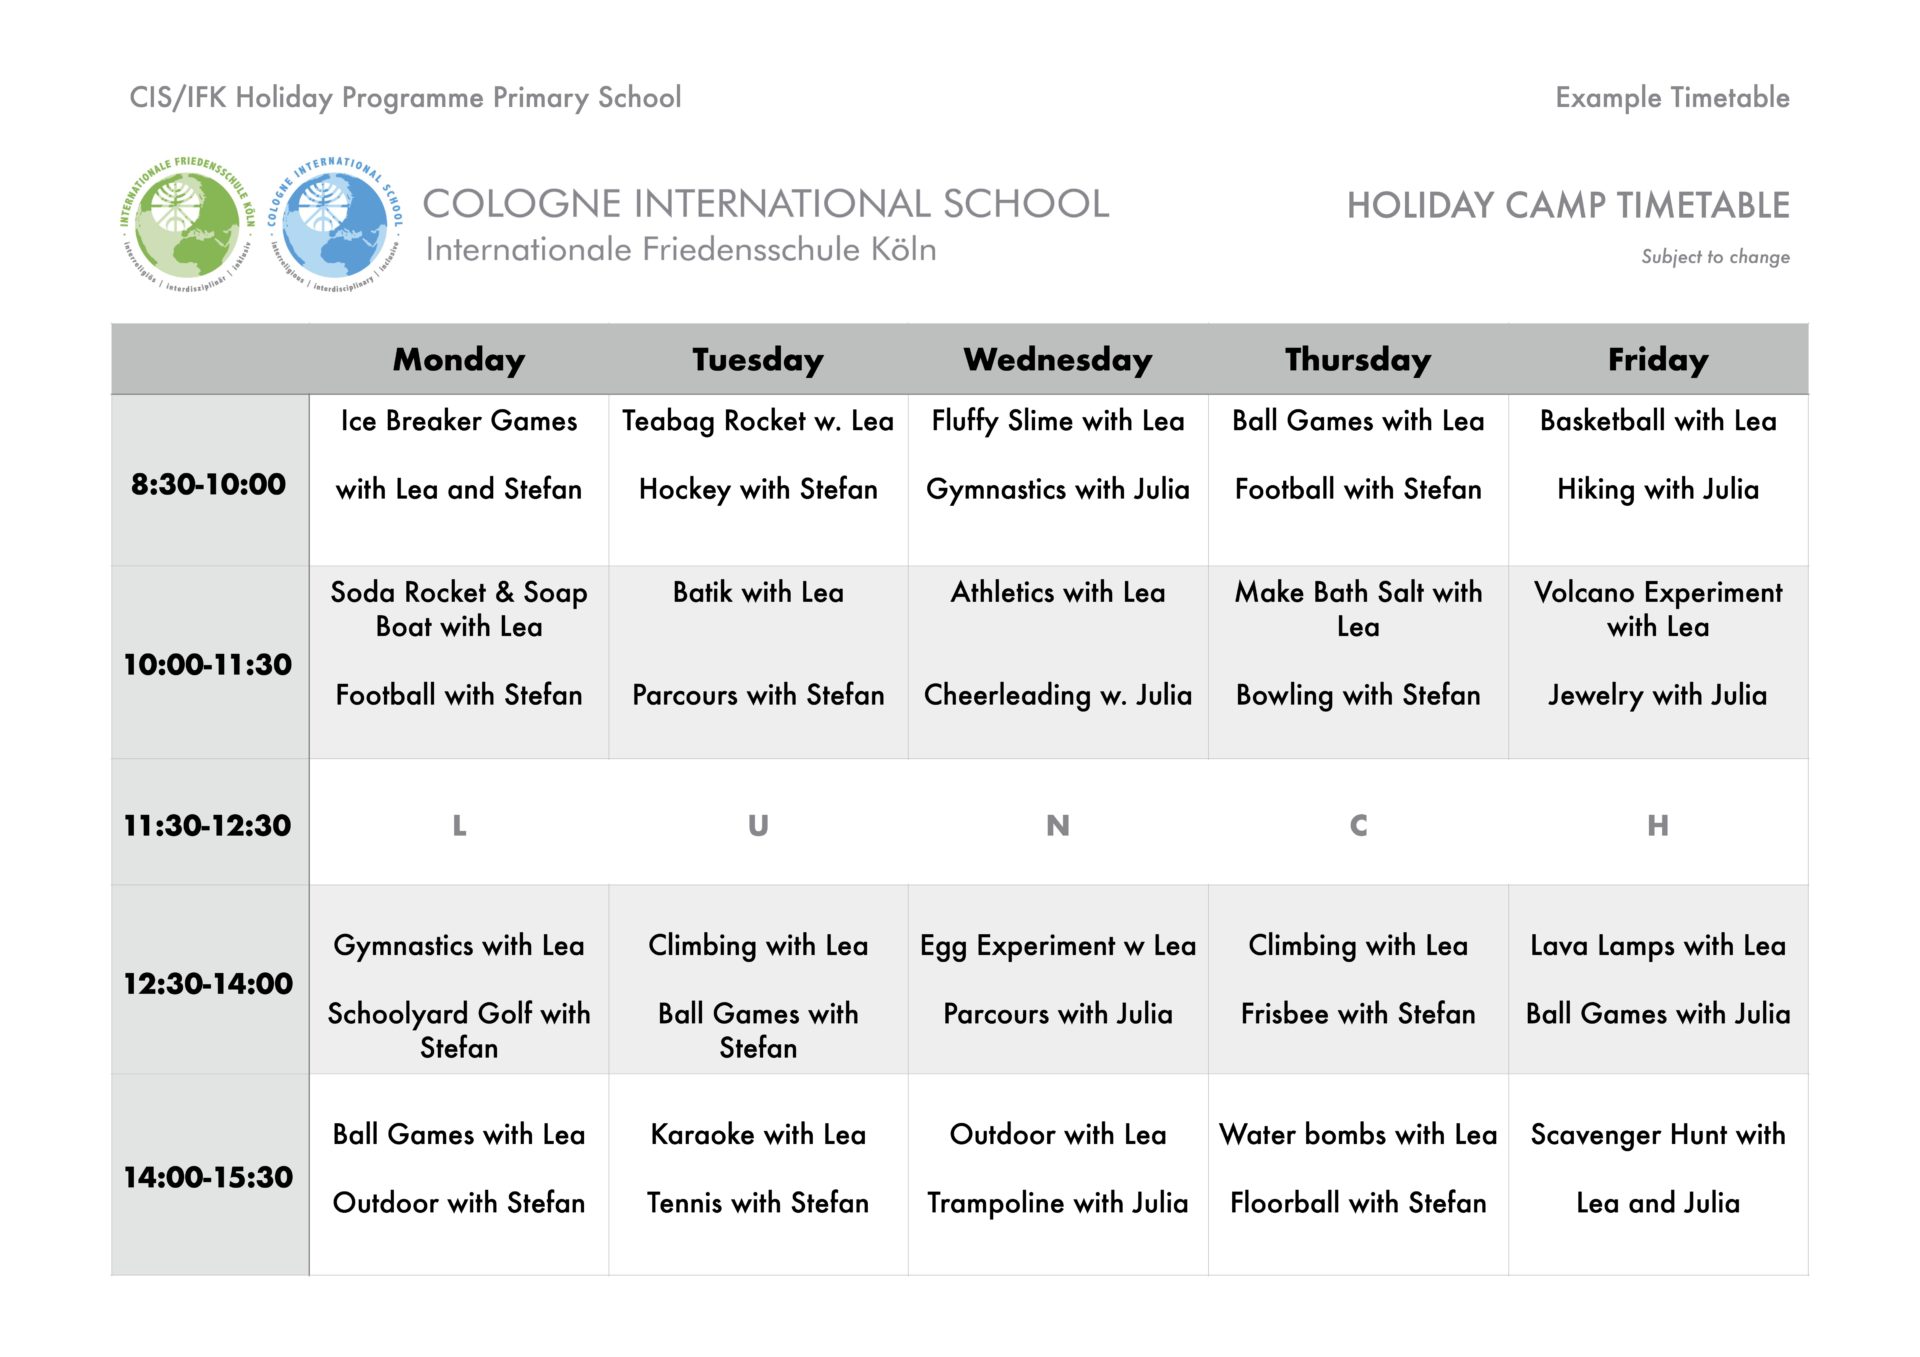 Holiday Camp Example Timetable